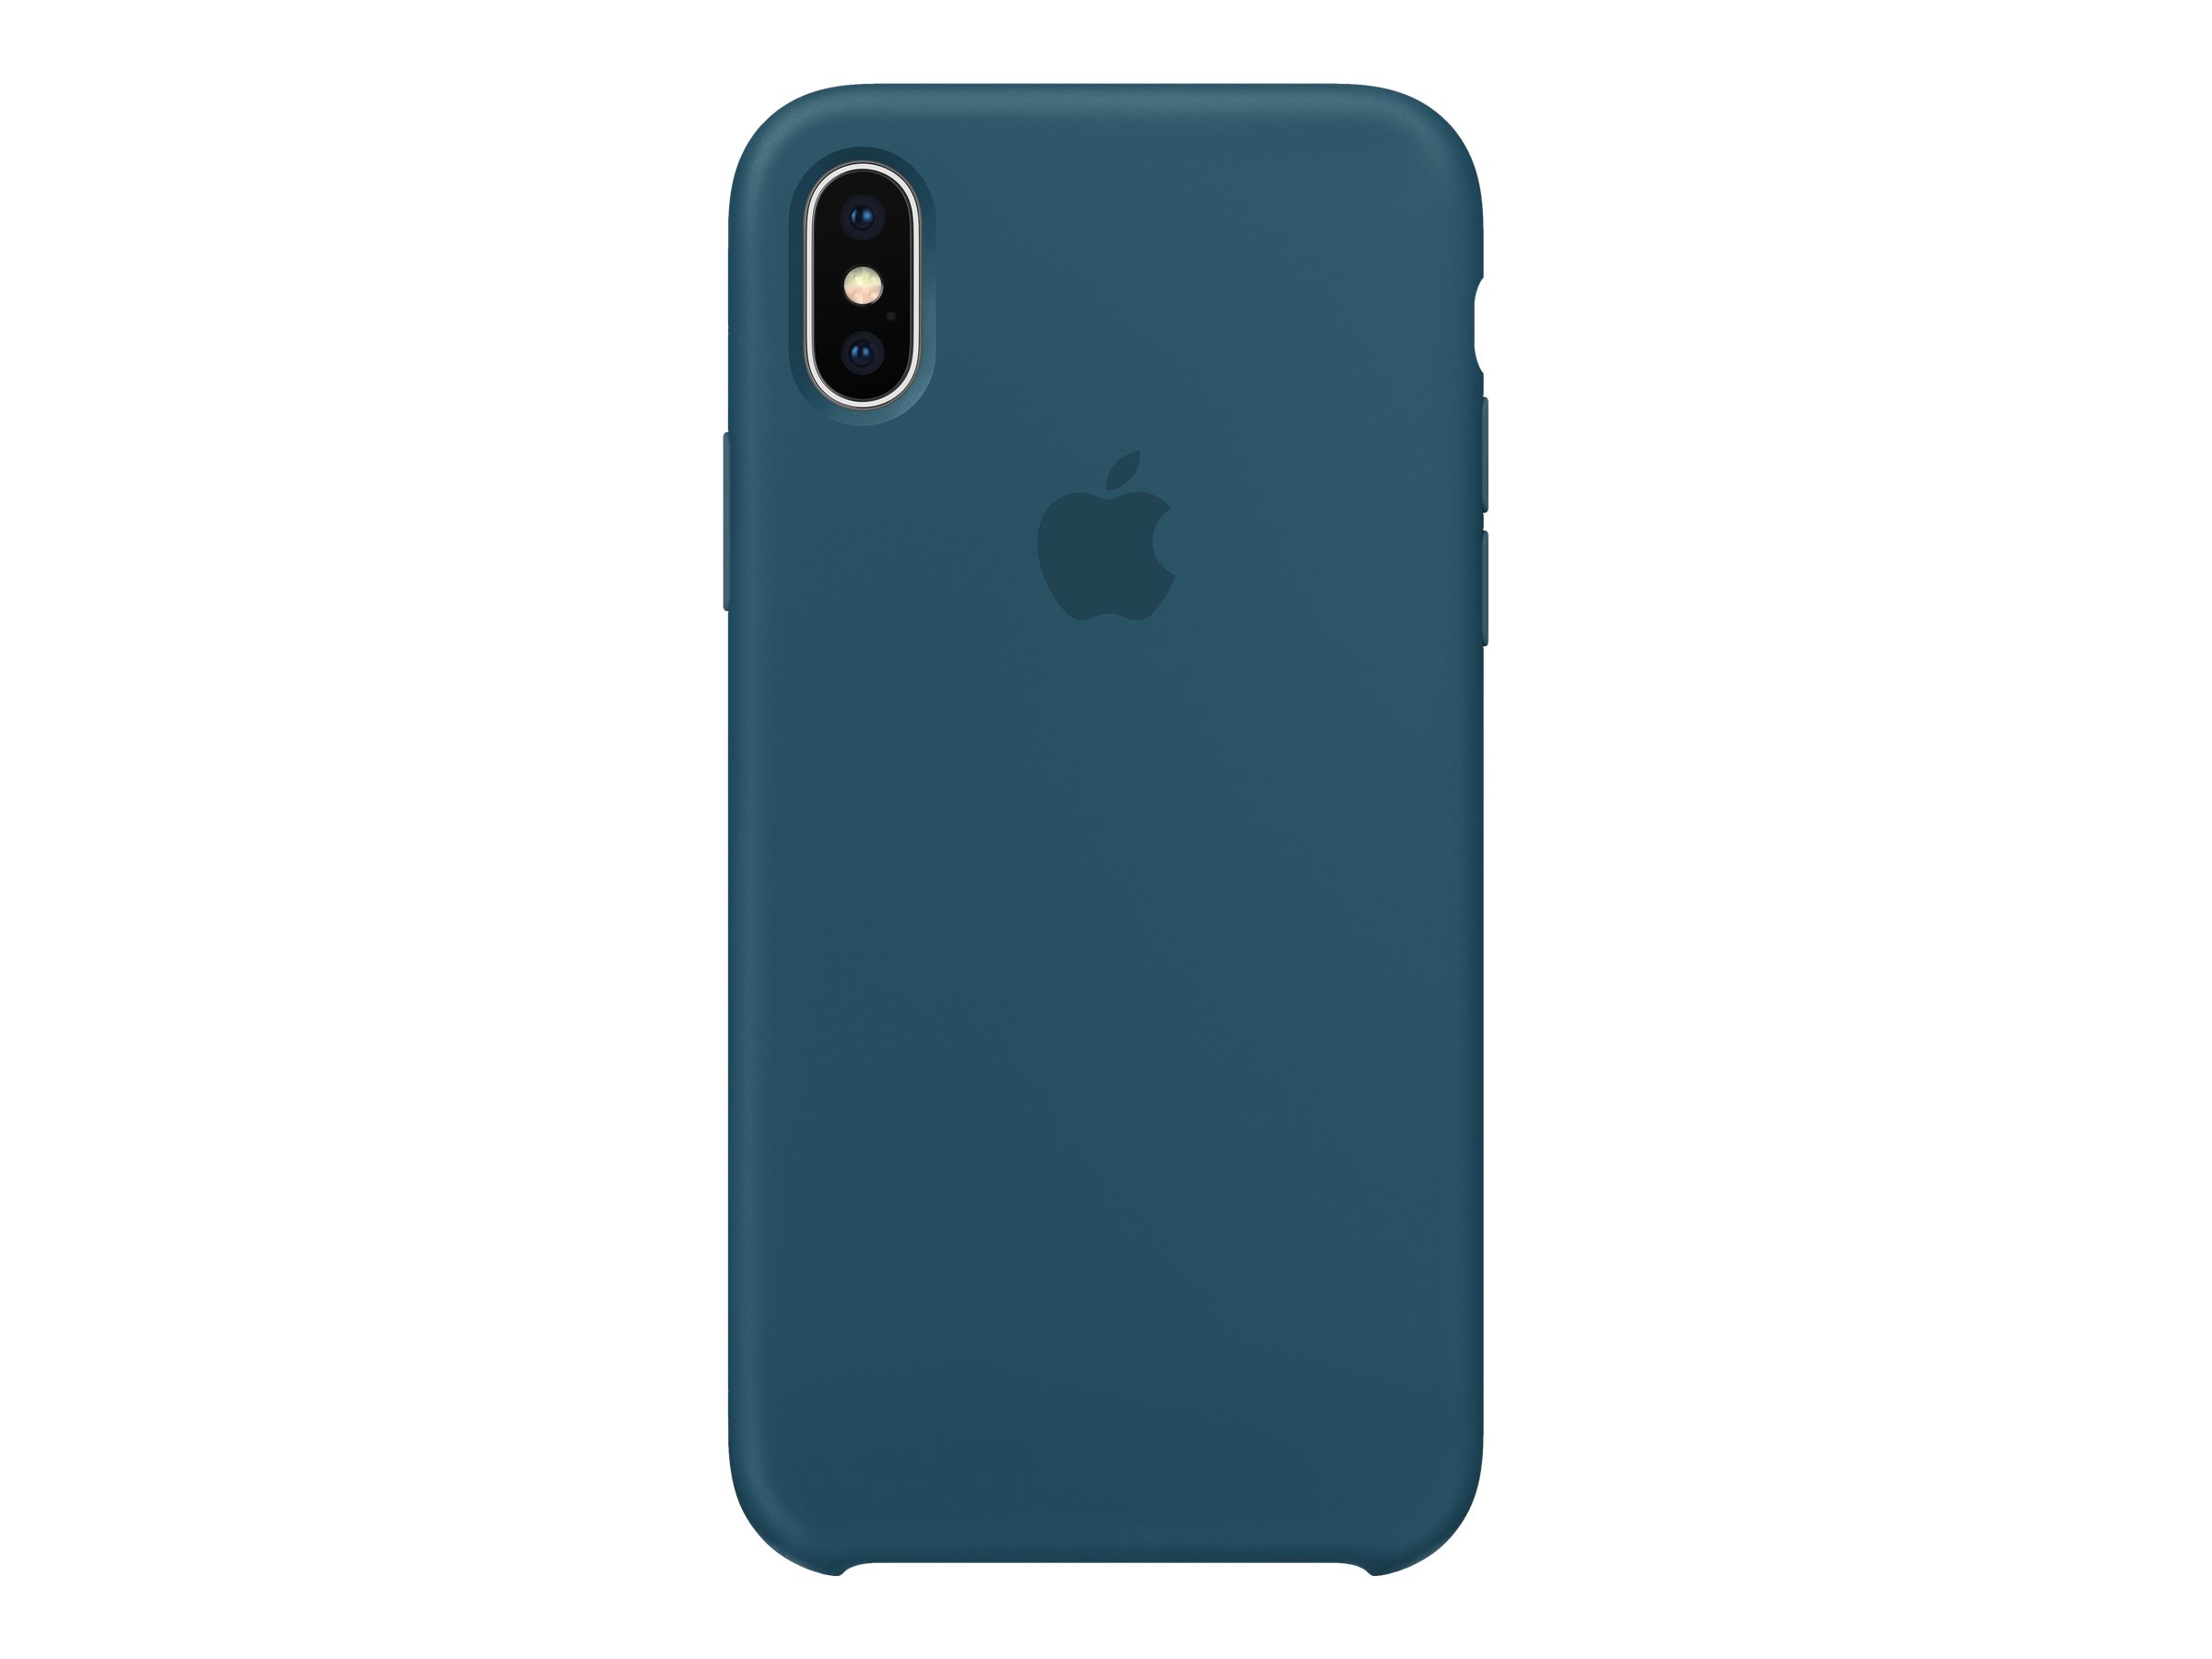 Refurbished Apple MR6G2ZM/A Silicone Case for iPhone X - Cosmos Blue - image 3 of 5